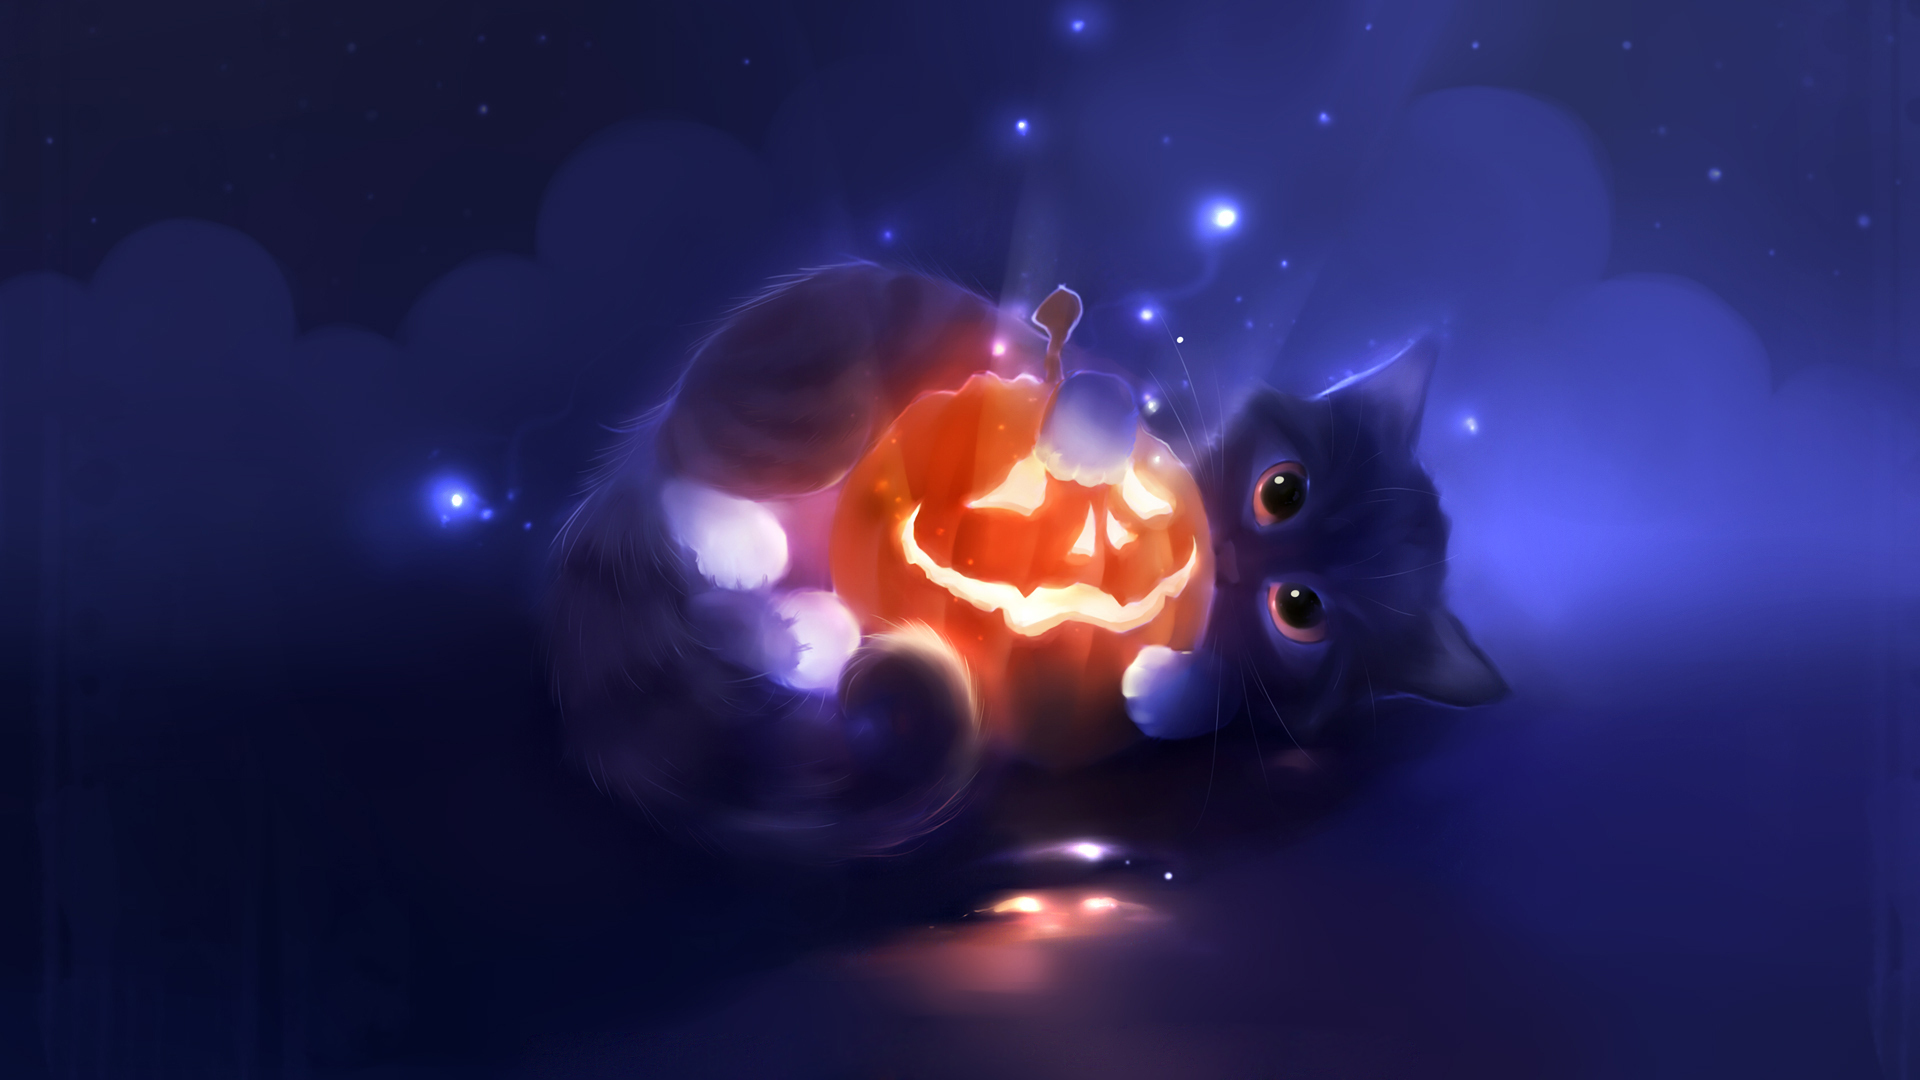 Free download Download Cute Halloween Wallpaper 15765 1920x1080 px High [ 1920x1080] for your Desktop, Mobile & Tablet. Explore Cute Halloween Wallpaper. Free Halloween Wallpaper, Animated Halloween Wallpaper